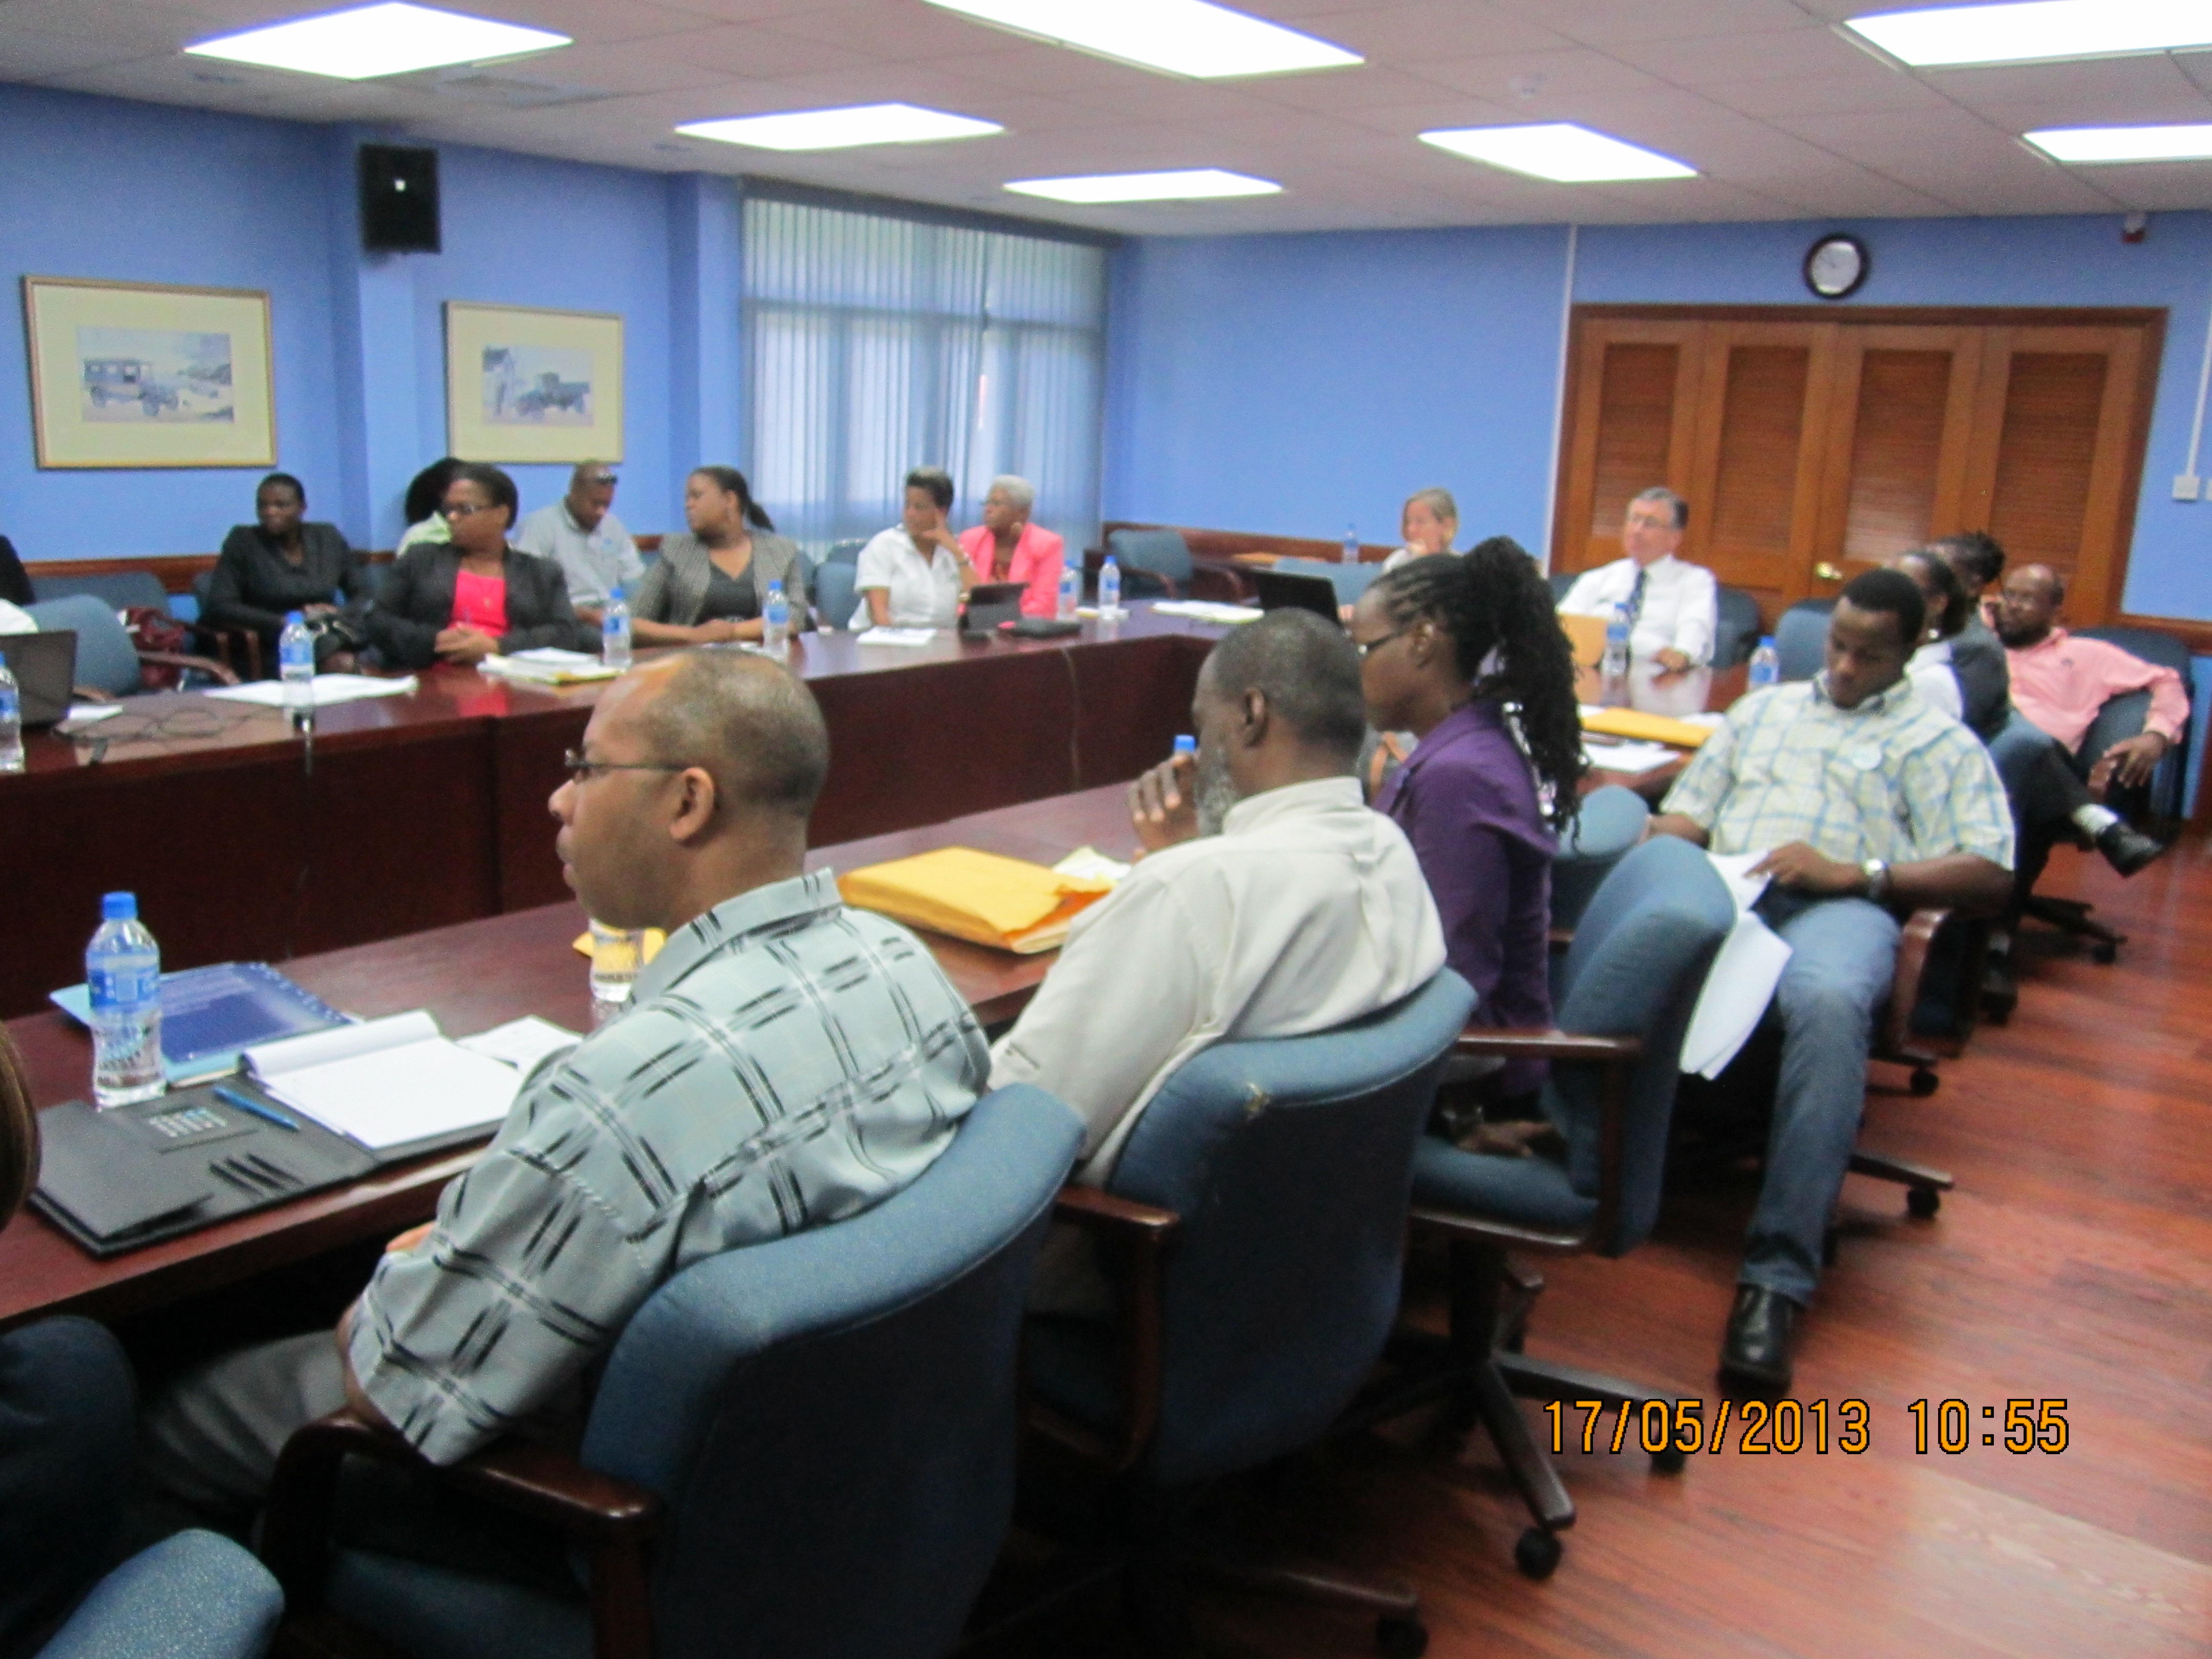 Small Business Development Centre (SBDC) Certificate Training(May 17, 2013)